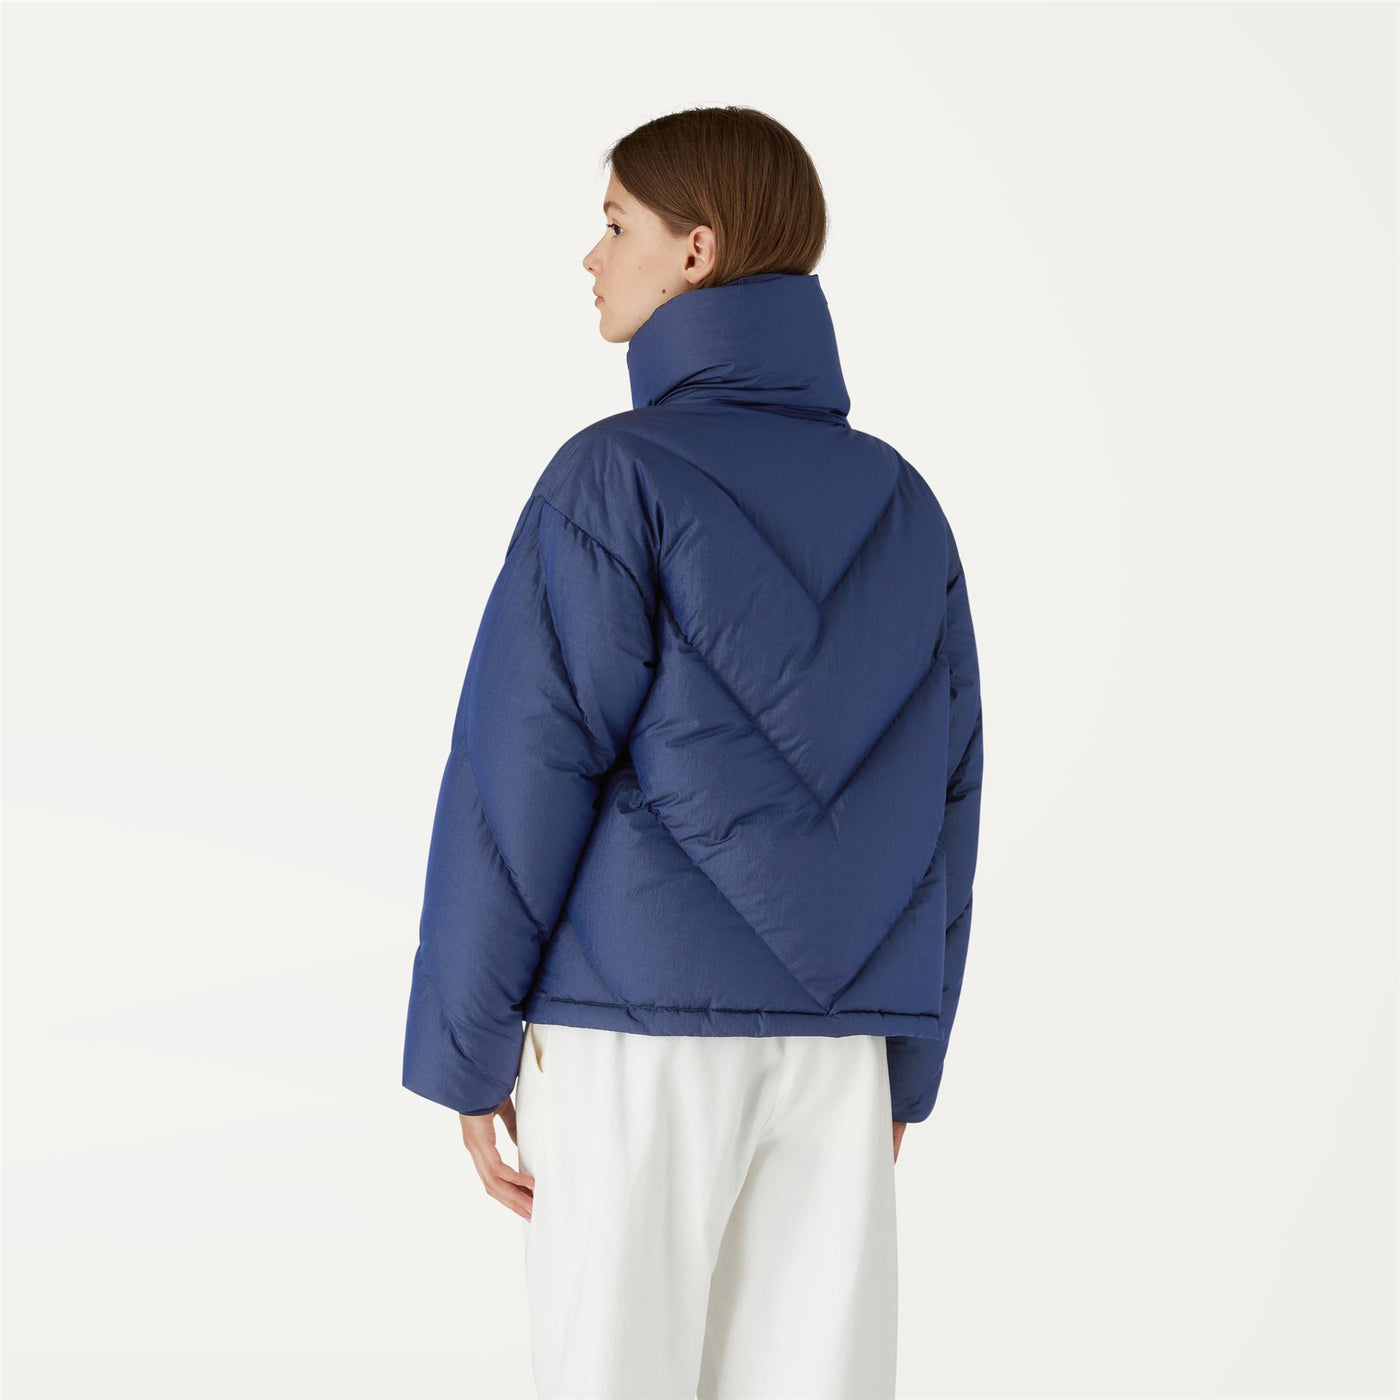 Jackets Woman IMELDINE HEAVY QUILTED LAPIS LAZULI Short BLUE MEDIEVAL - SILVER Dressed Front Double		